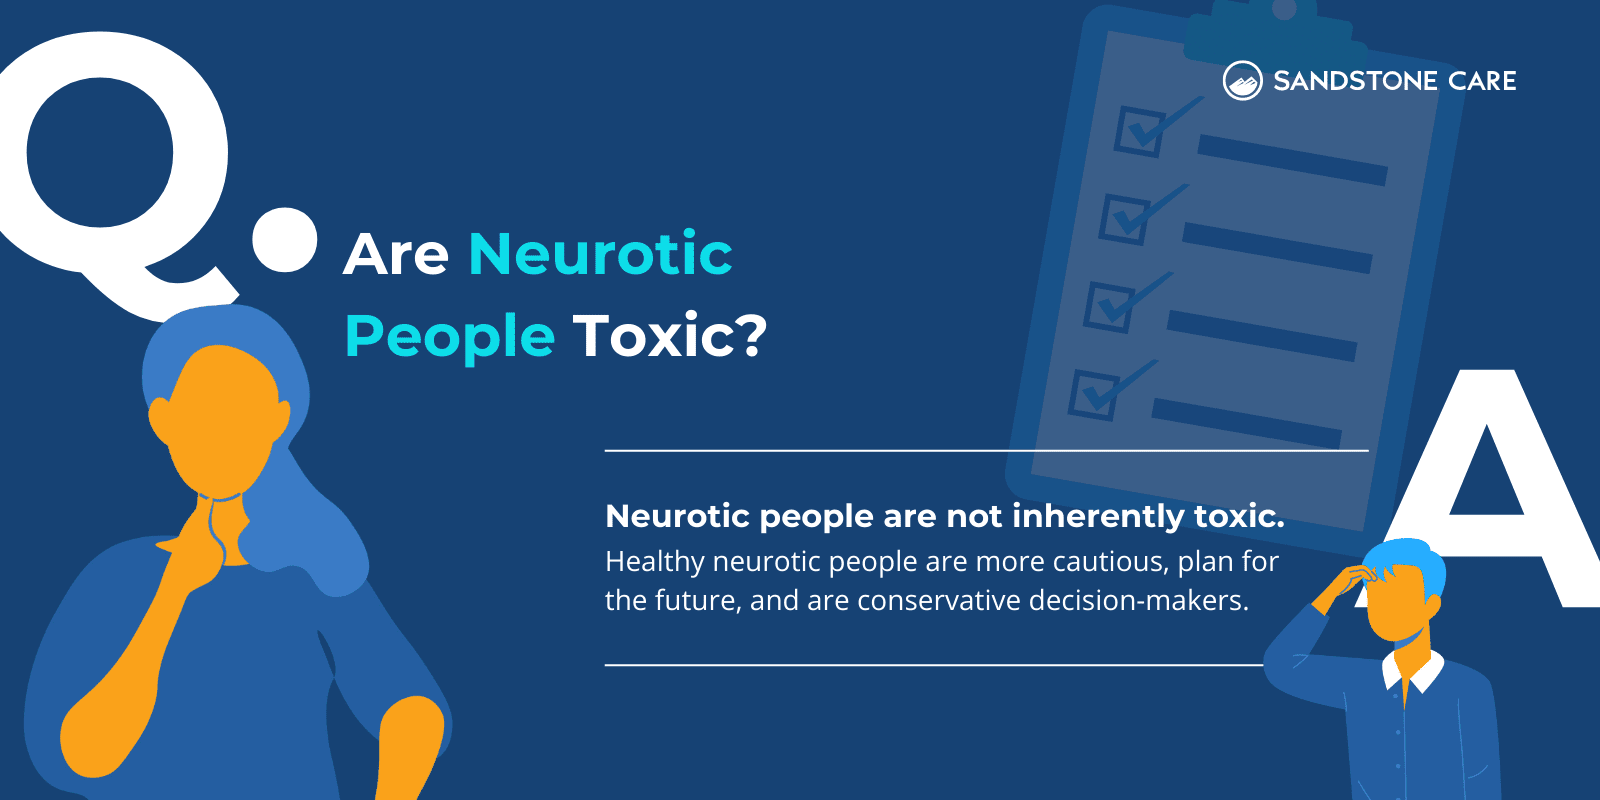 "Q. Are Neurotic People Toxic" written above the answer with relevant illustrations of people looking curious and cautious